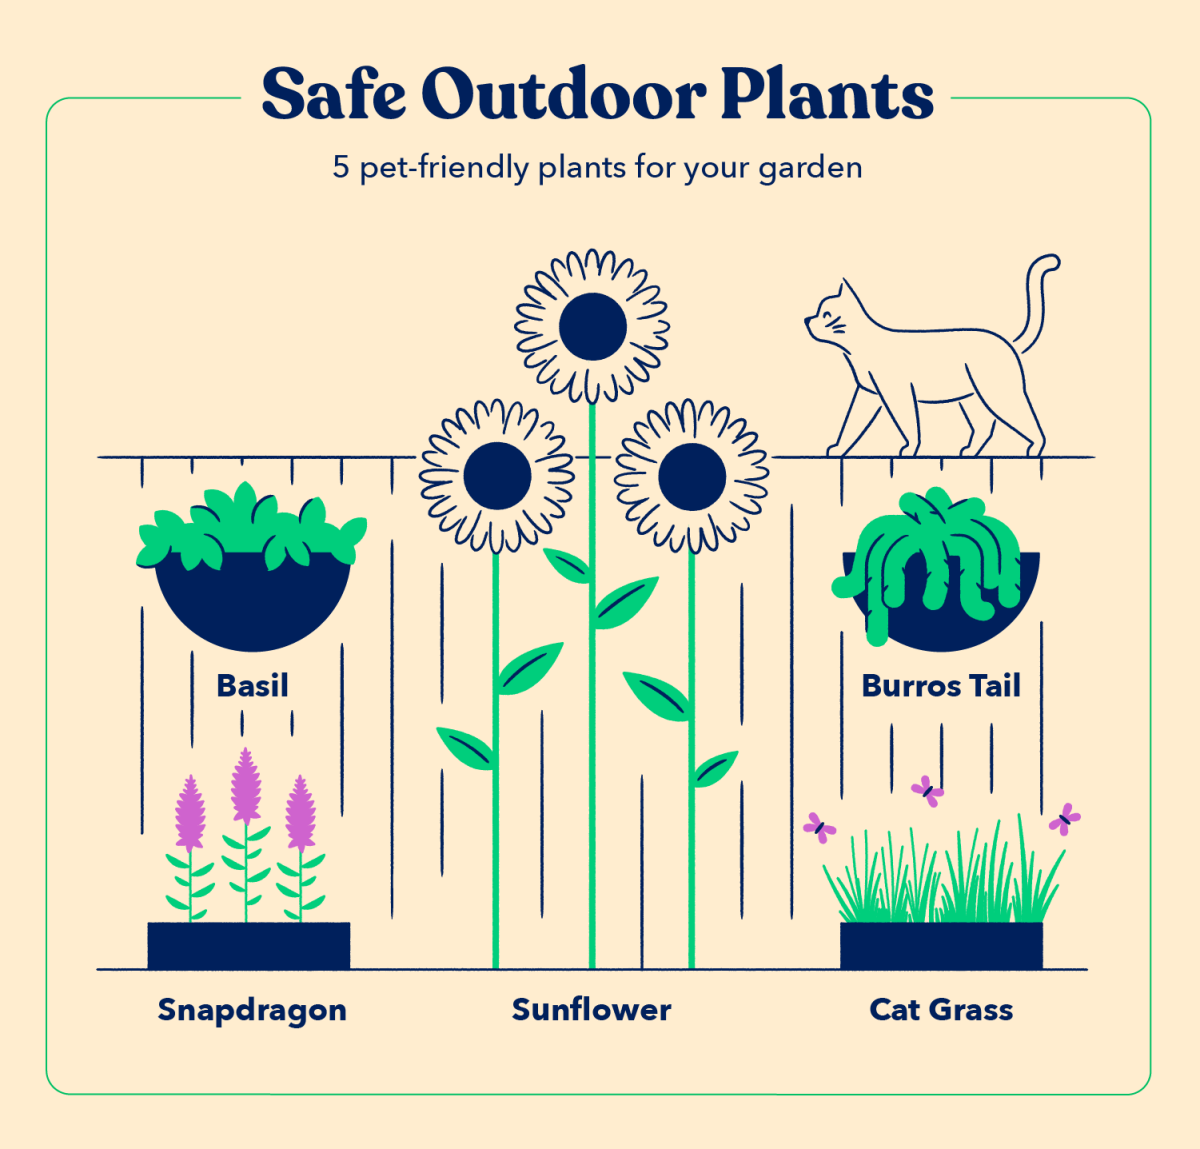 Pet-friendly plants and Toxic plants to pets